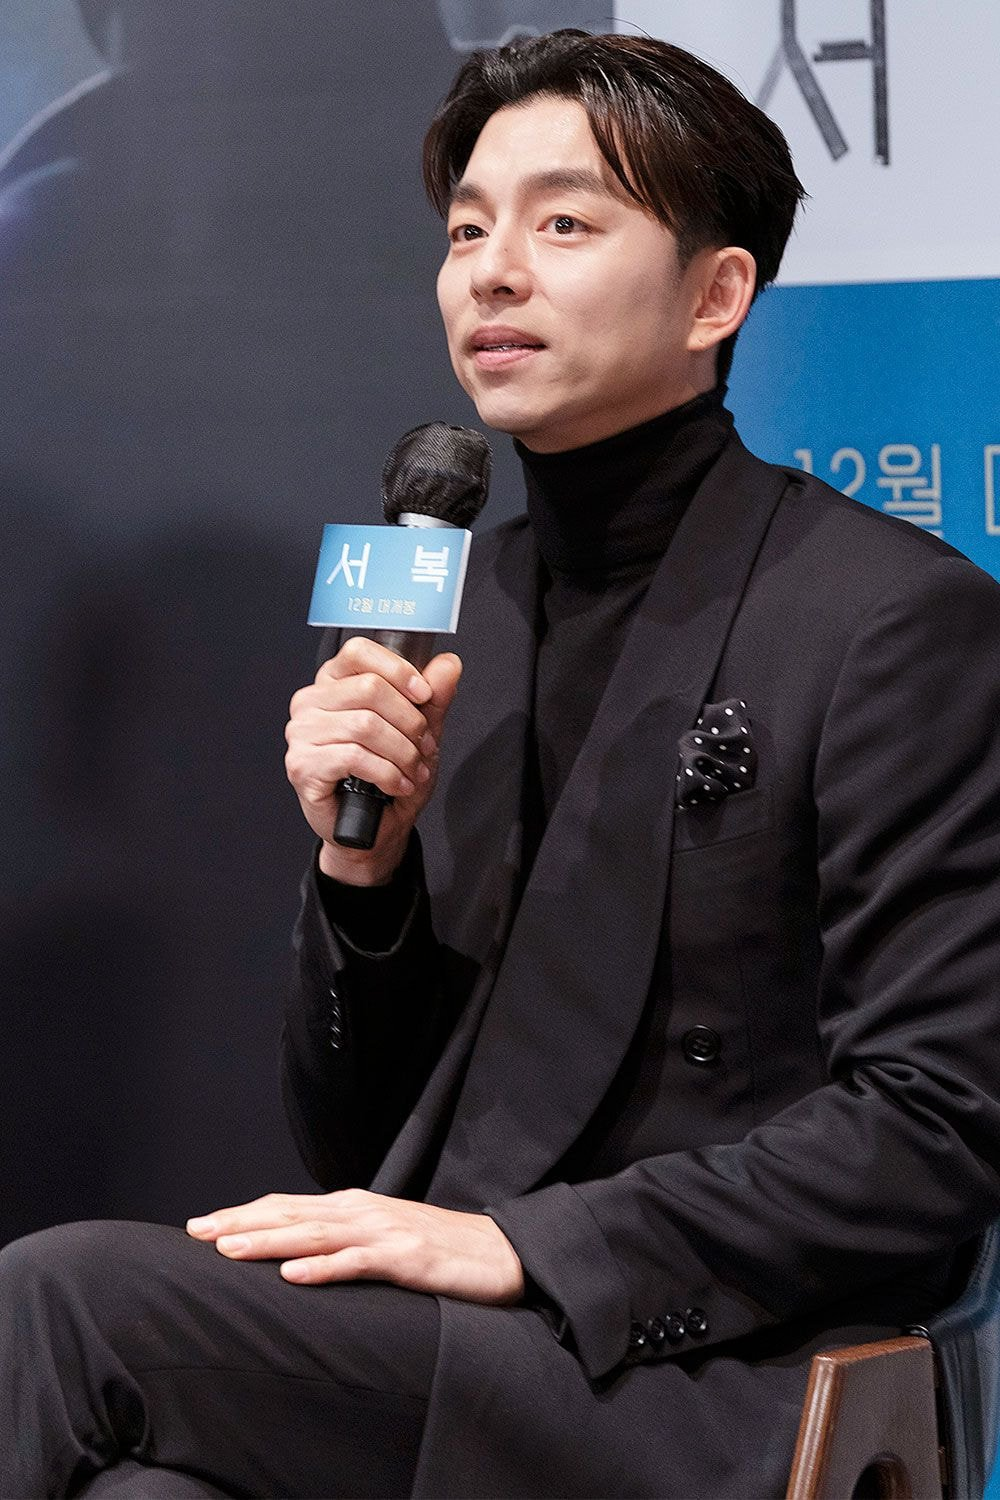 Most Korean netizens have stated that Gong Yoo's new hairstyle is weir...